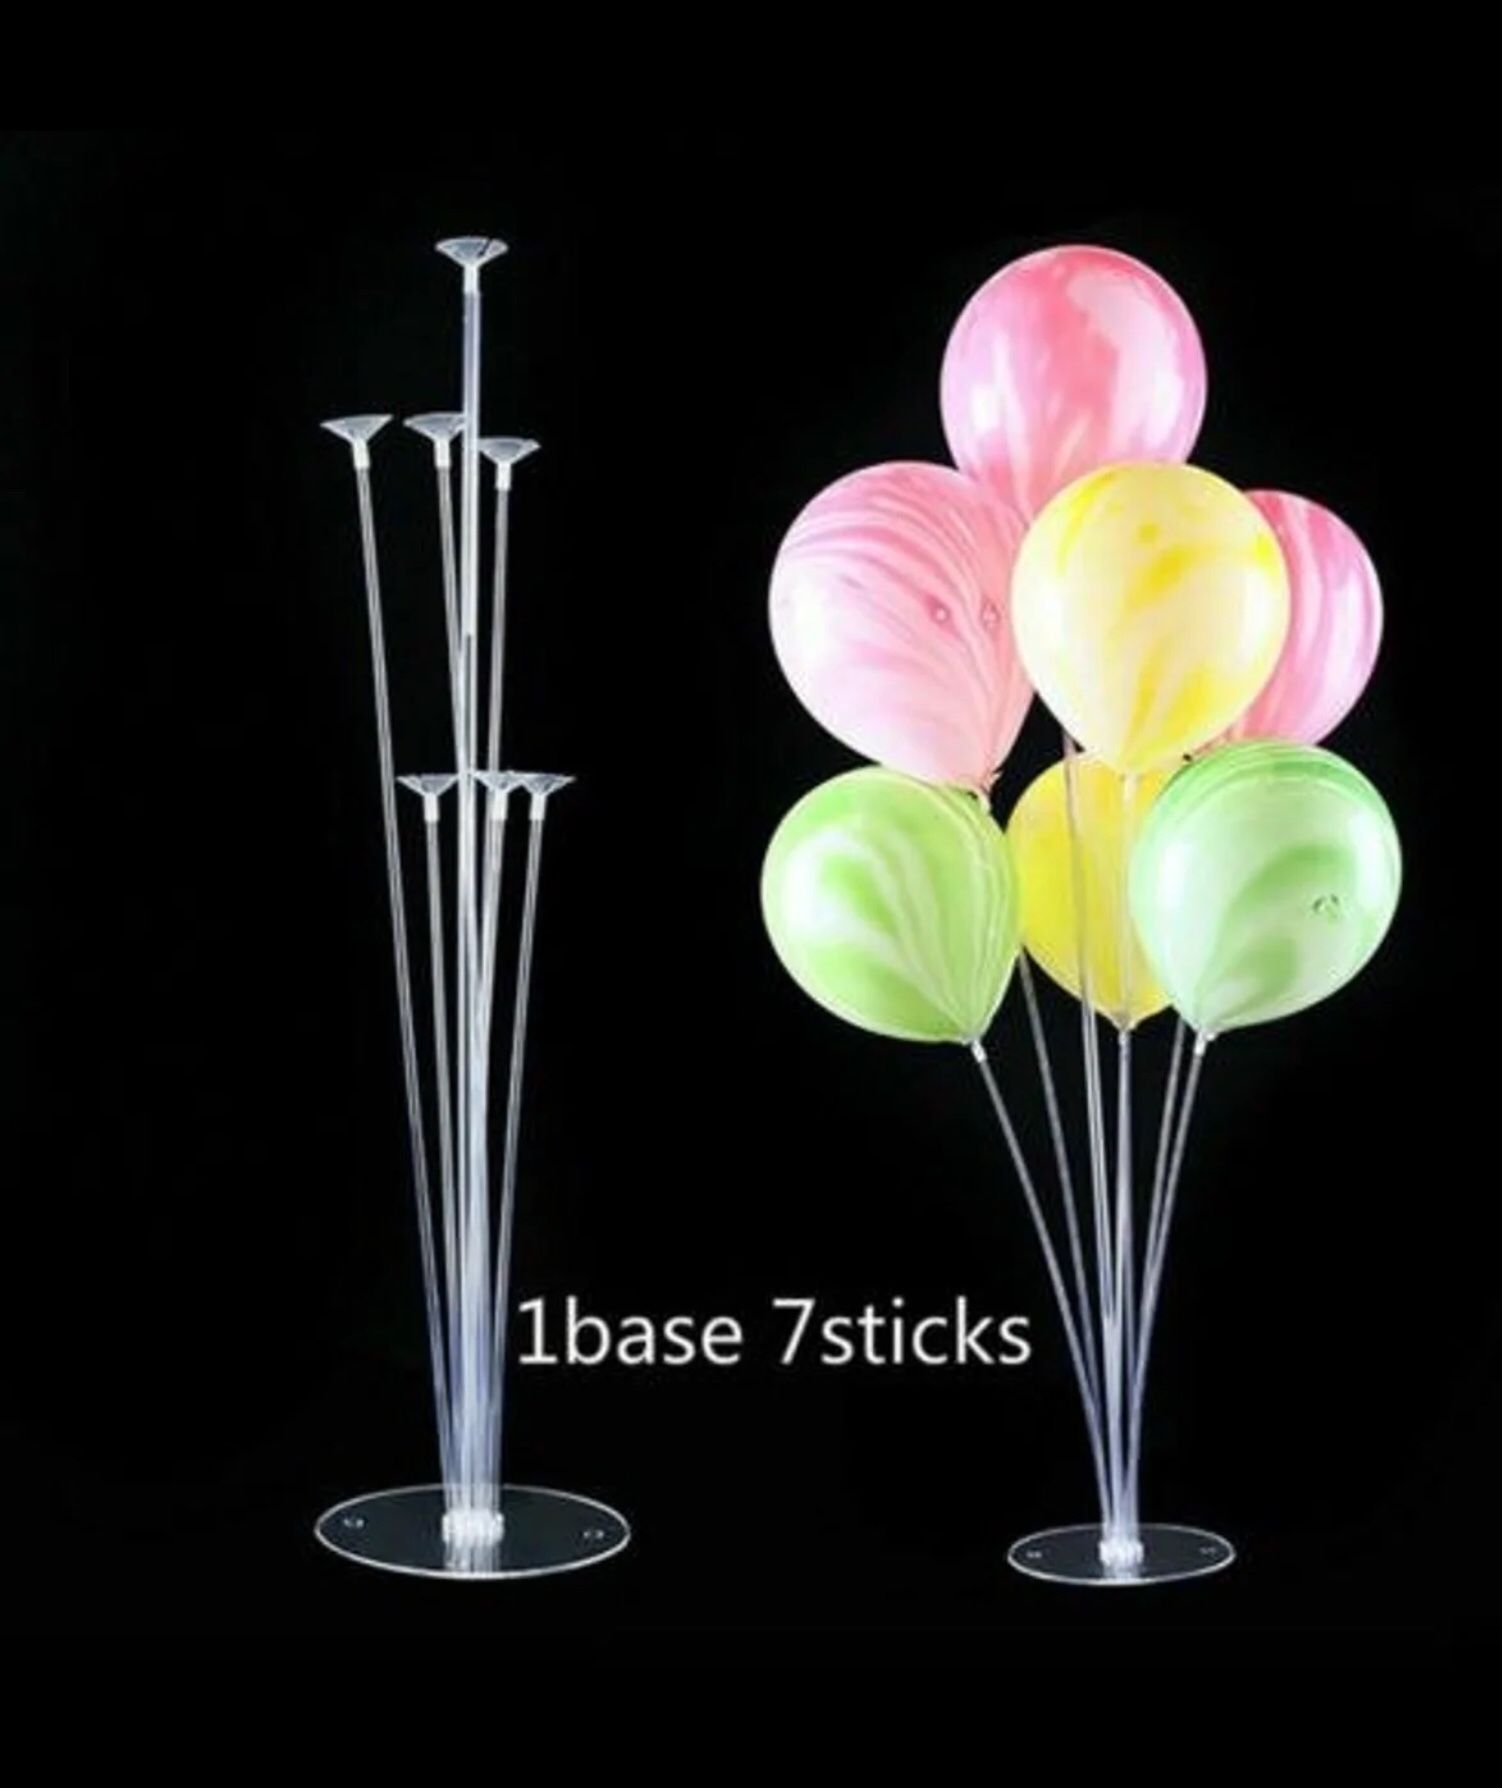 (10 Stands) Table Balloon-Stand for Party Decorations, Wedding decorations, Birthday, Graduation, Gender reveal Parties